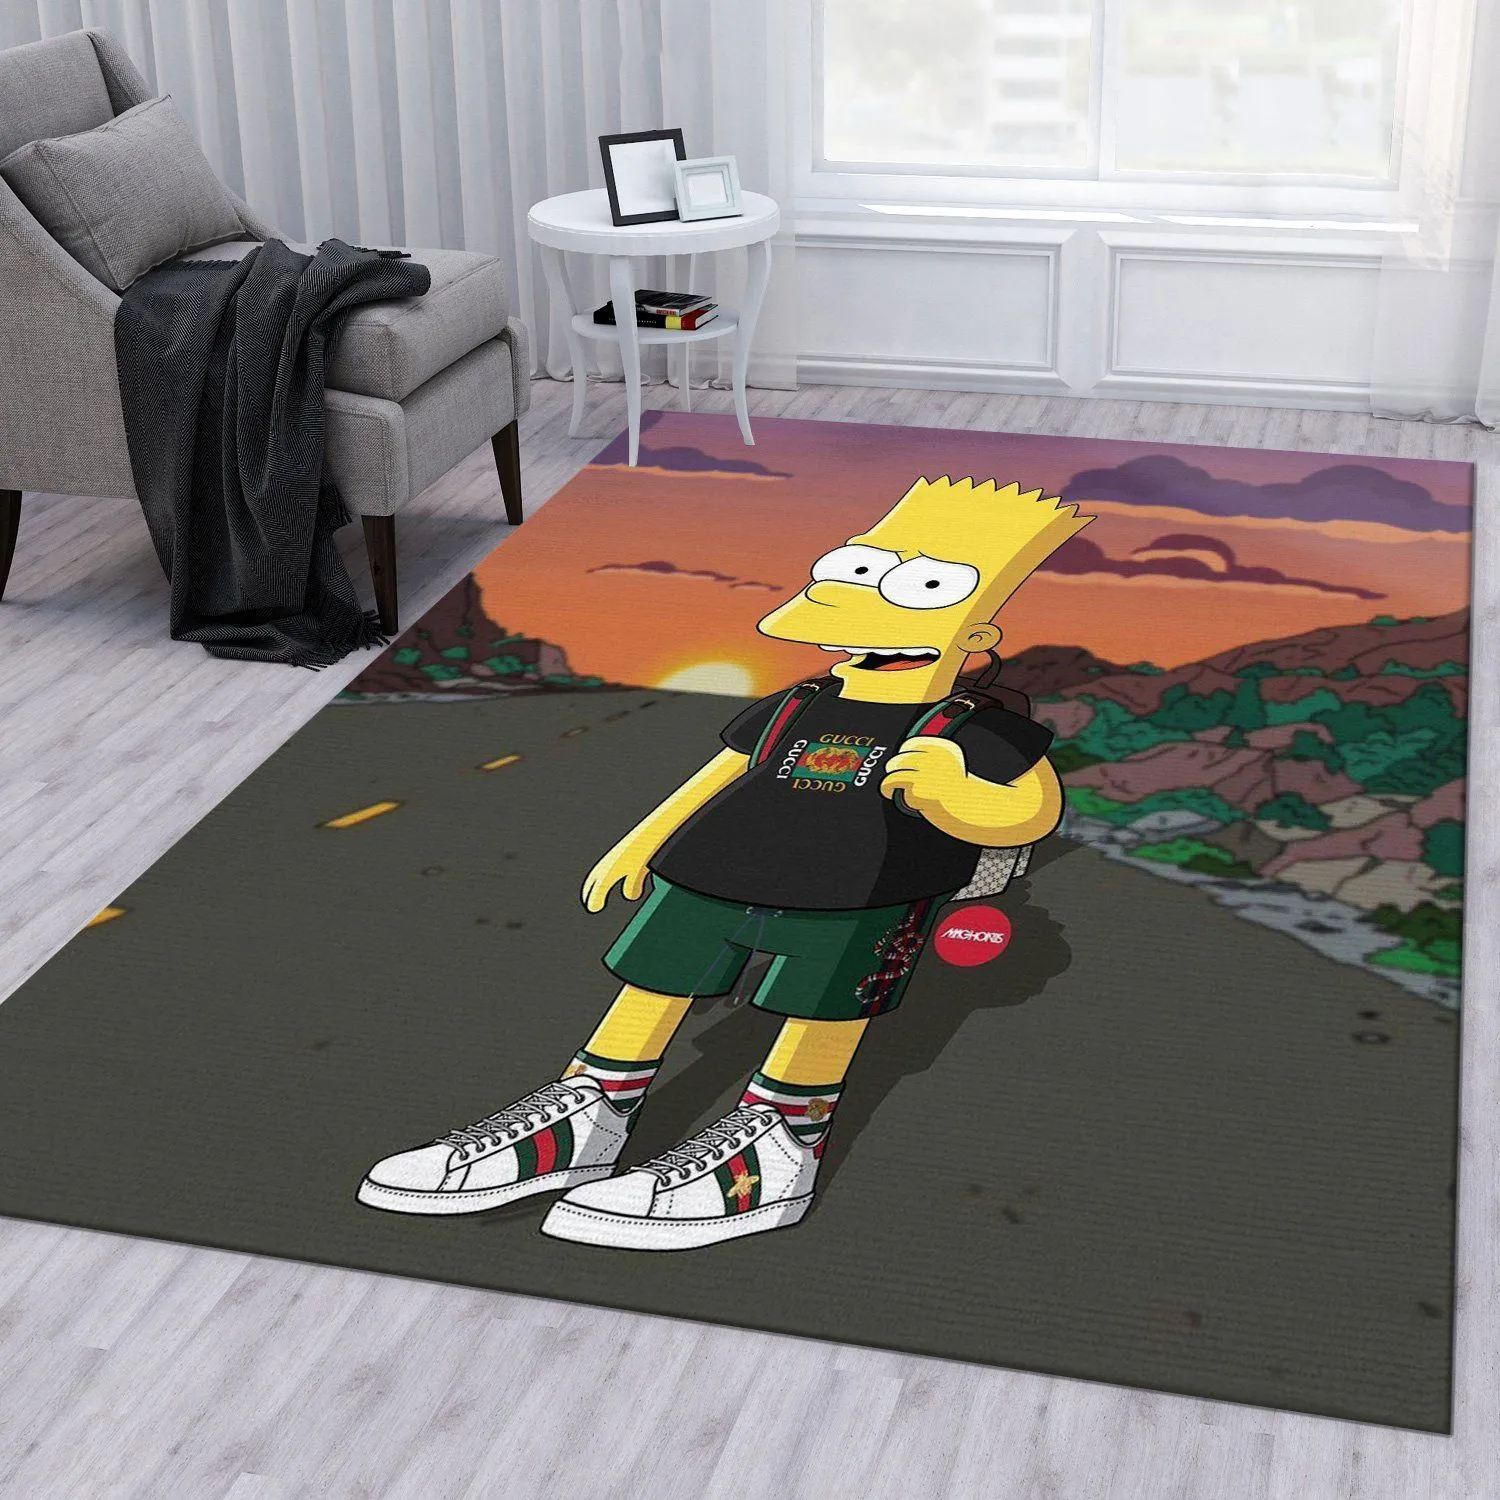 Gucci The Simpsons Rectangle Rug Luxury Area Carpet Door Mat Fashion Brand Home Decor